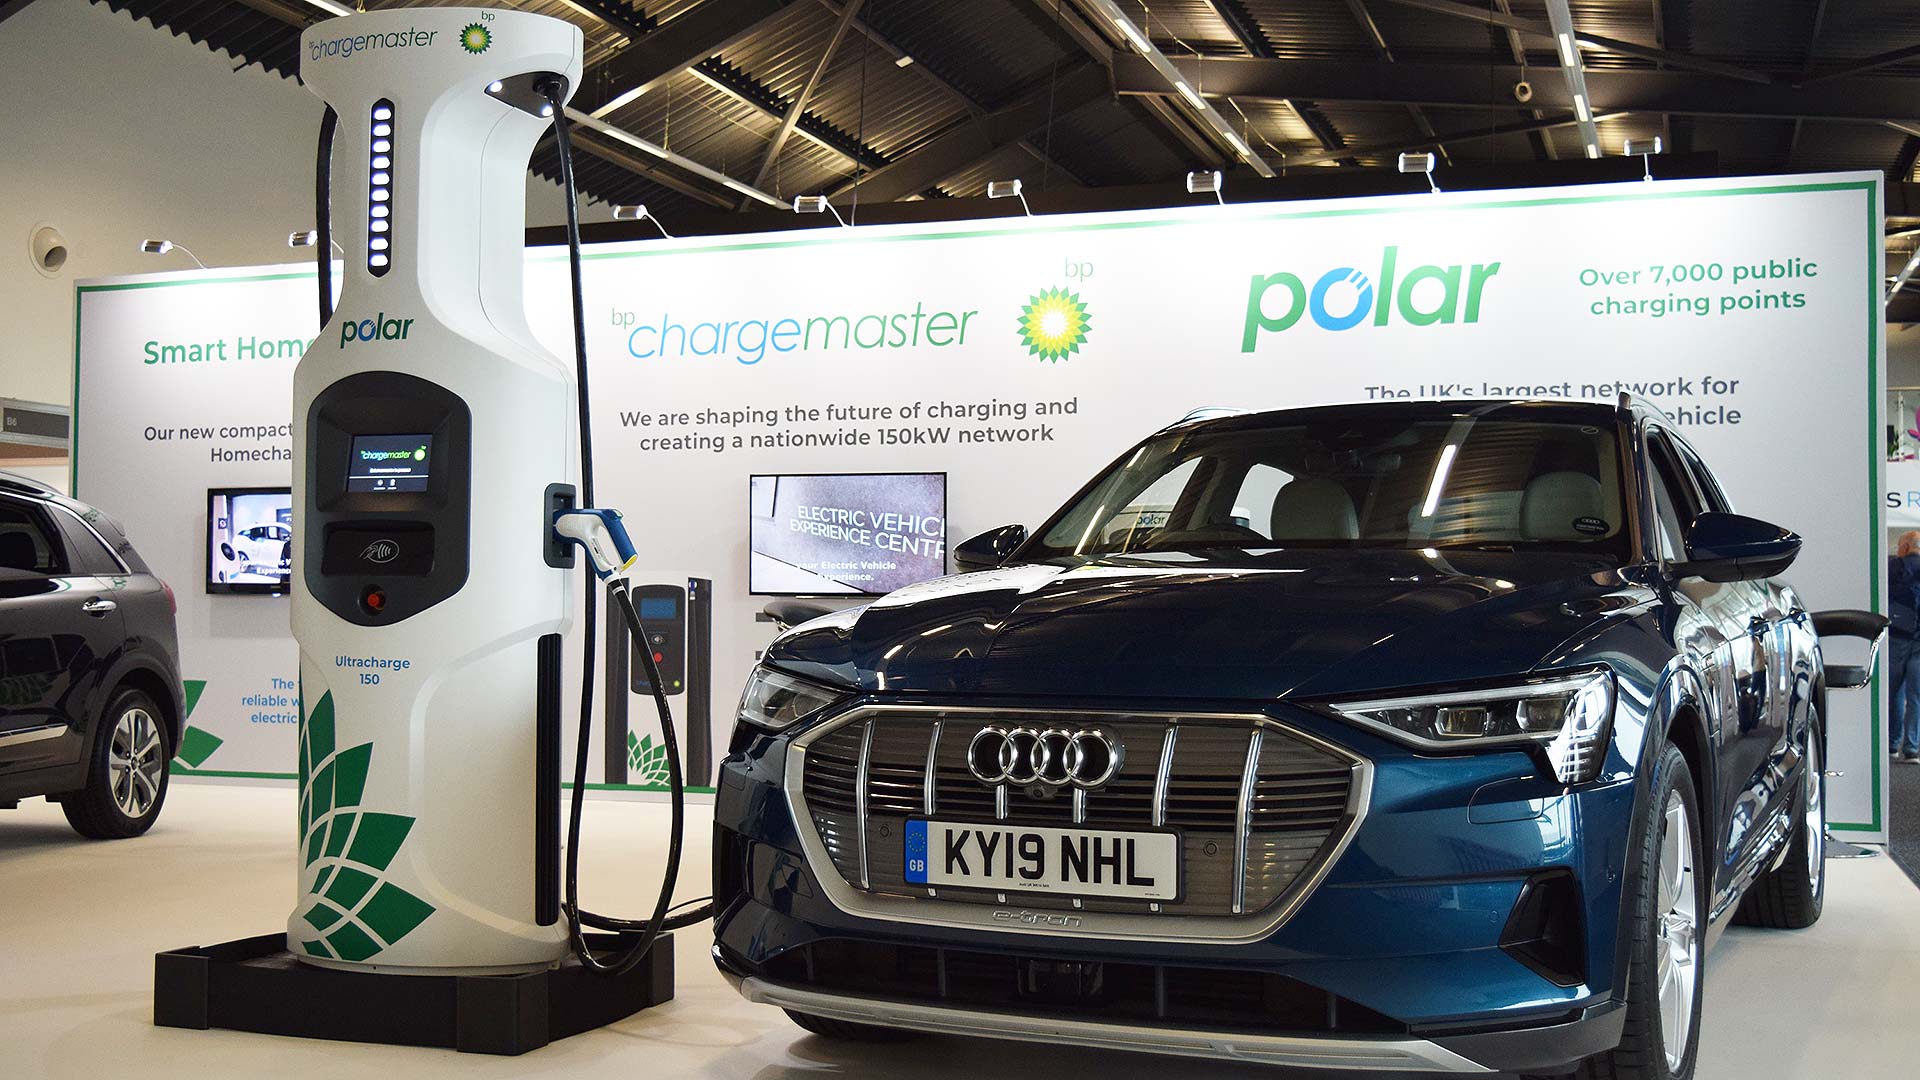 BP Chargemaster 150kW rapid charger